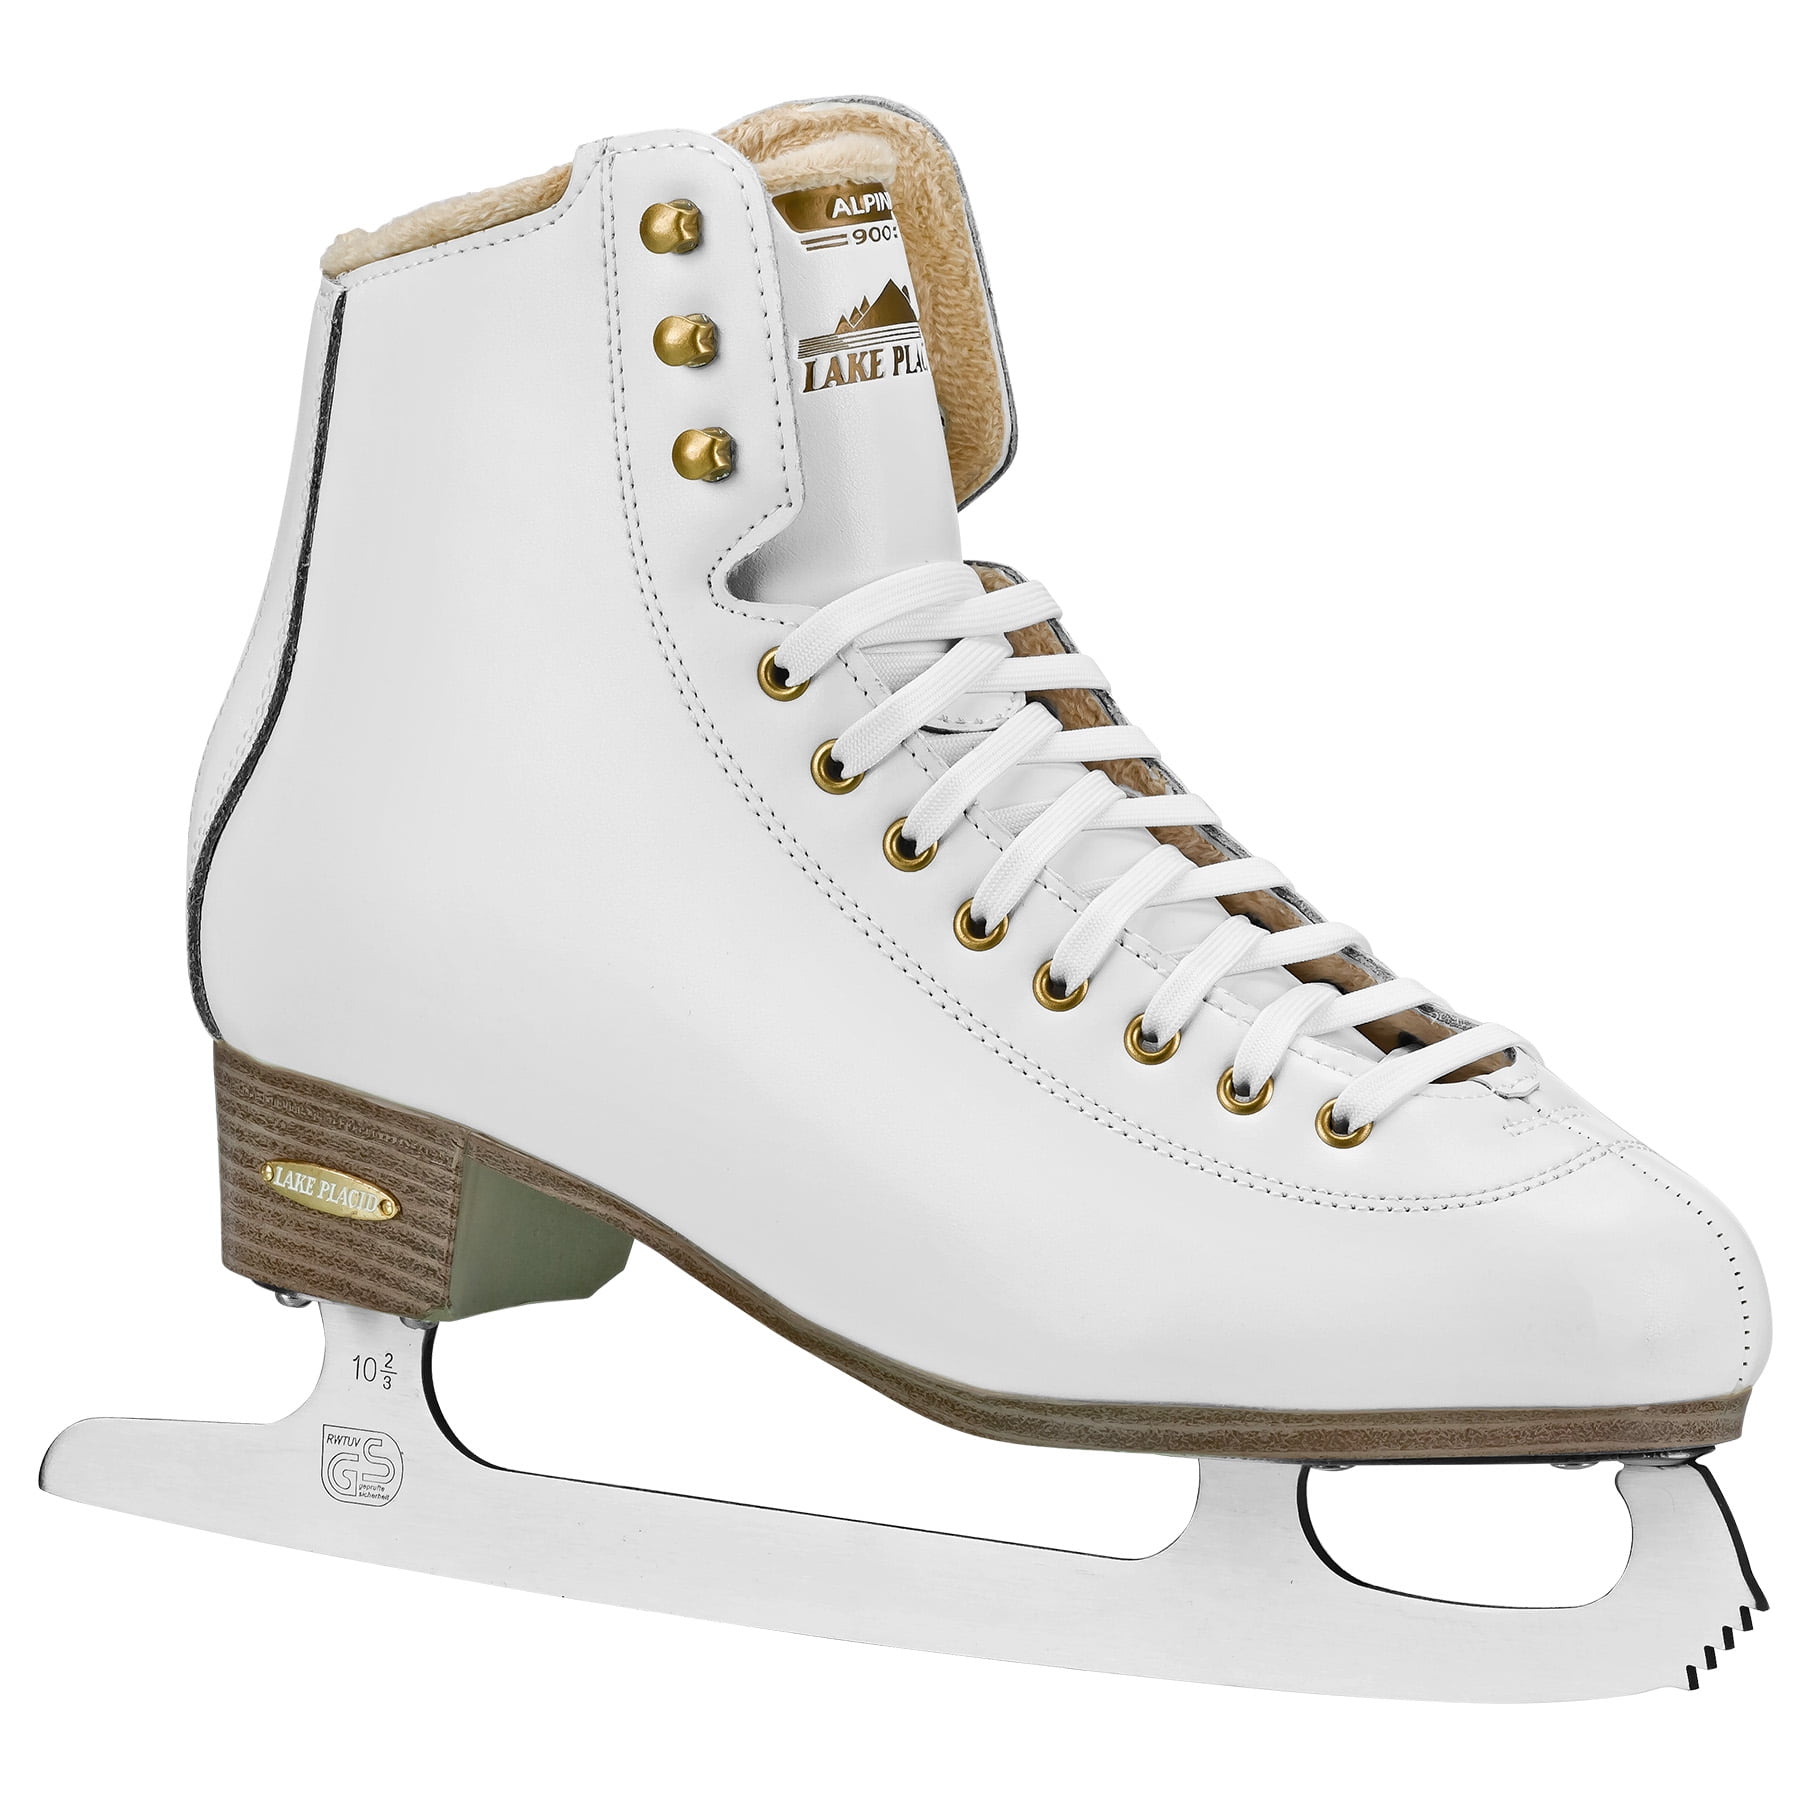 Sizes 2,3,4,5,6,7  AND KIDS 13,1 Childrens Ice Skates with free ISK8 bag 